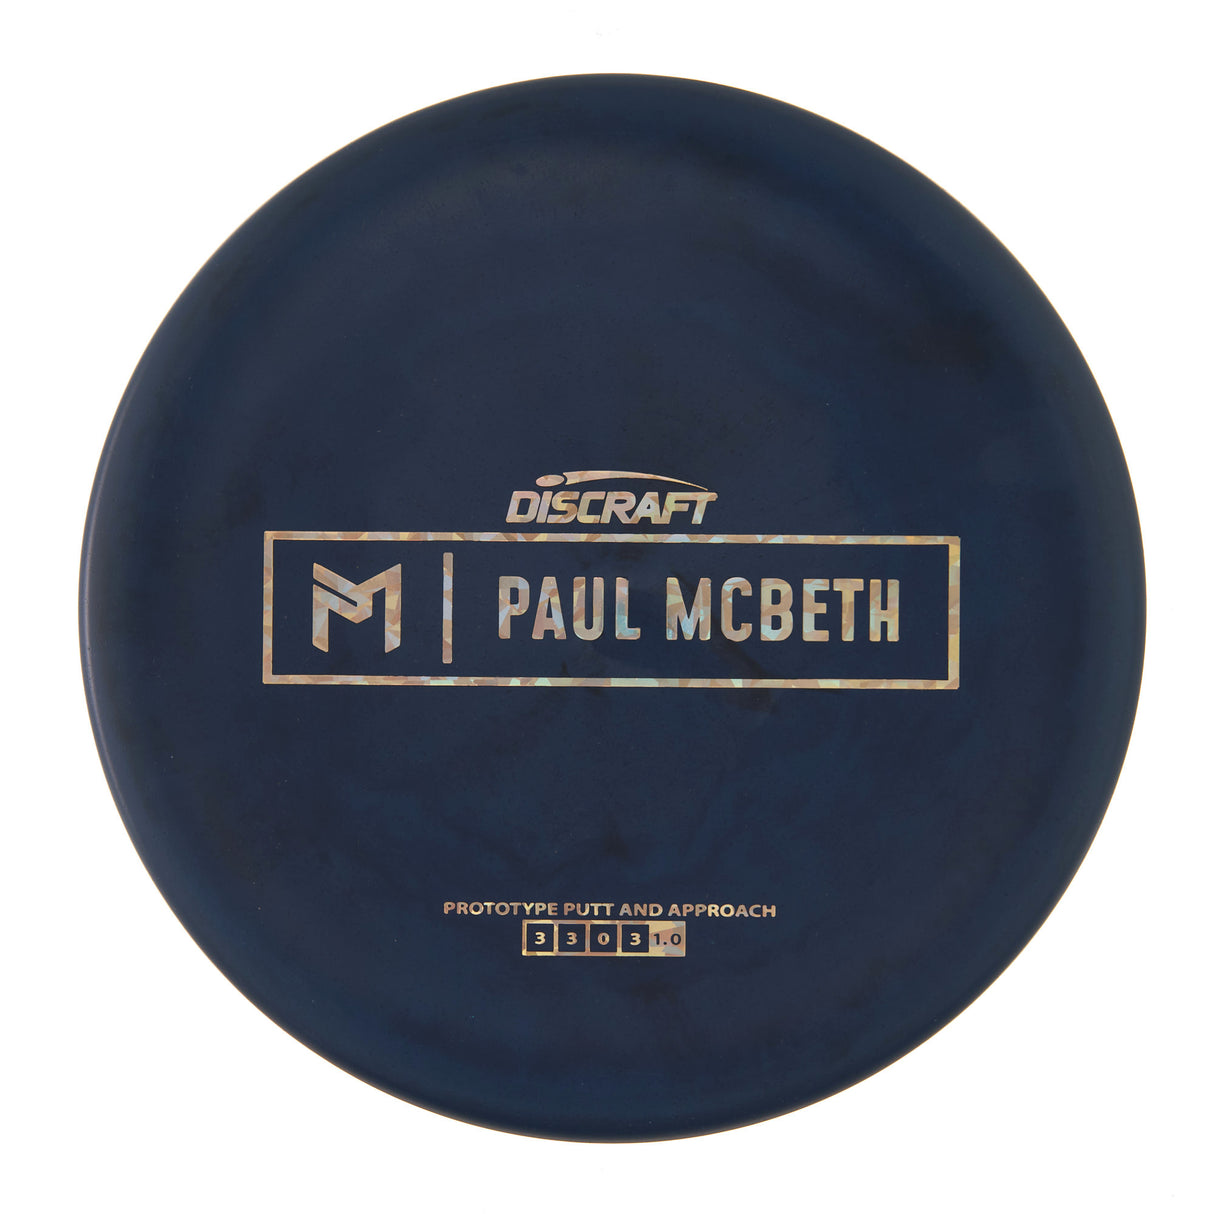 Discraft Kratos - Mcbeth Prototype Special Rubber Blend 172g | Style 0015